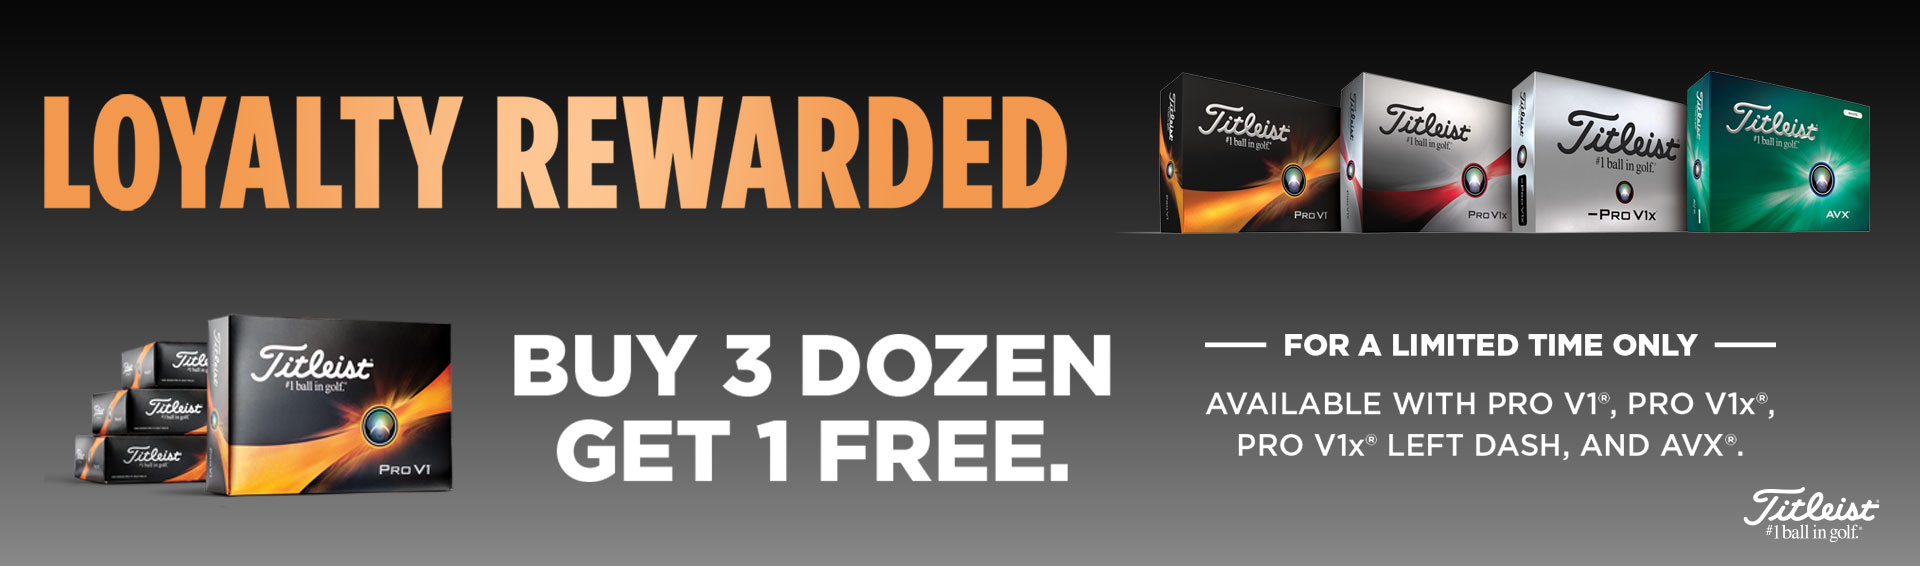 Titleist 4 For 3 Promotion